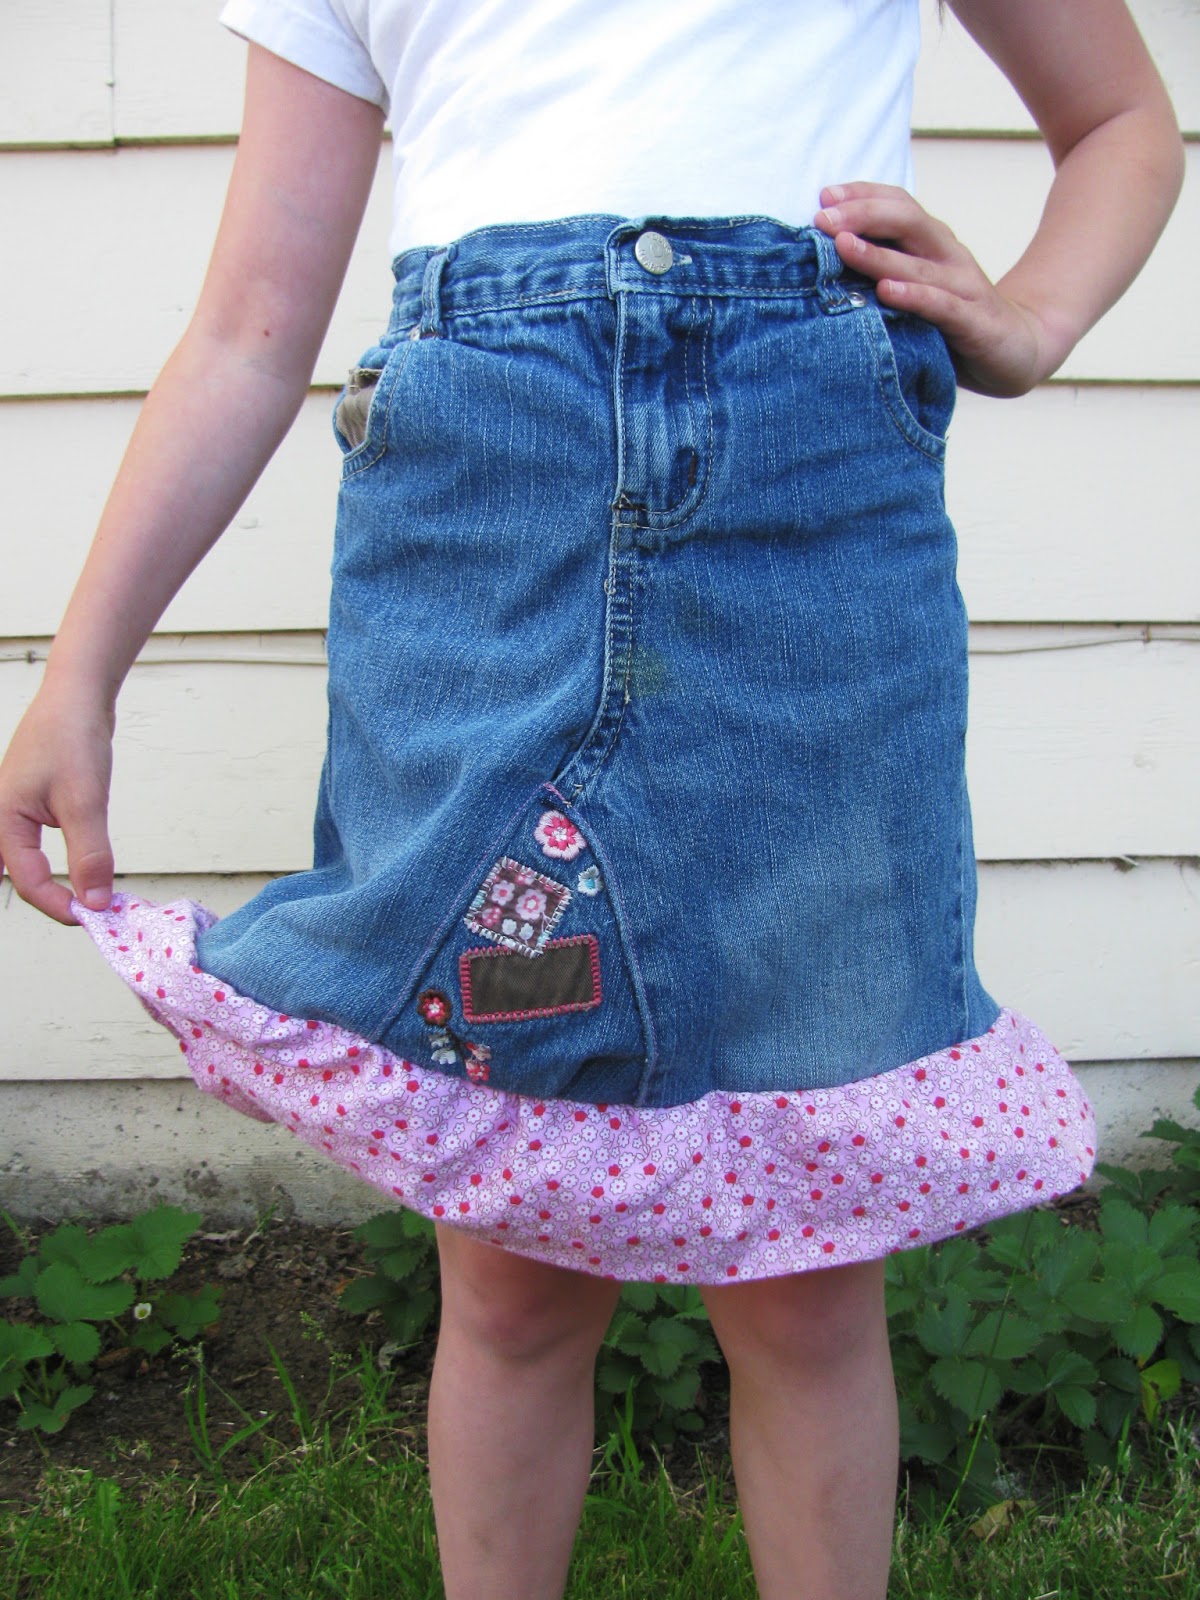 Turn Worn Jeans into a Cute Skirt | Proverbs 31 Woman